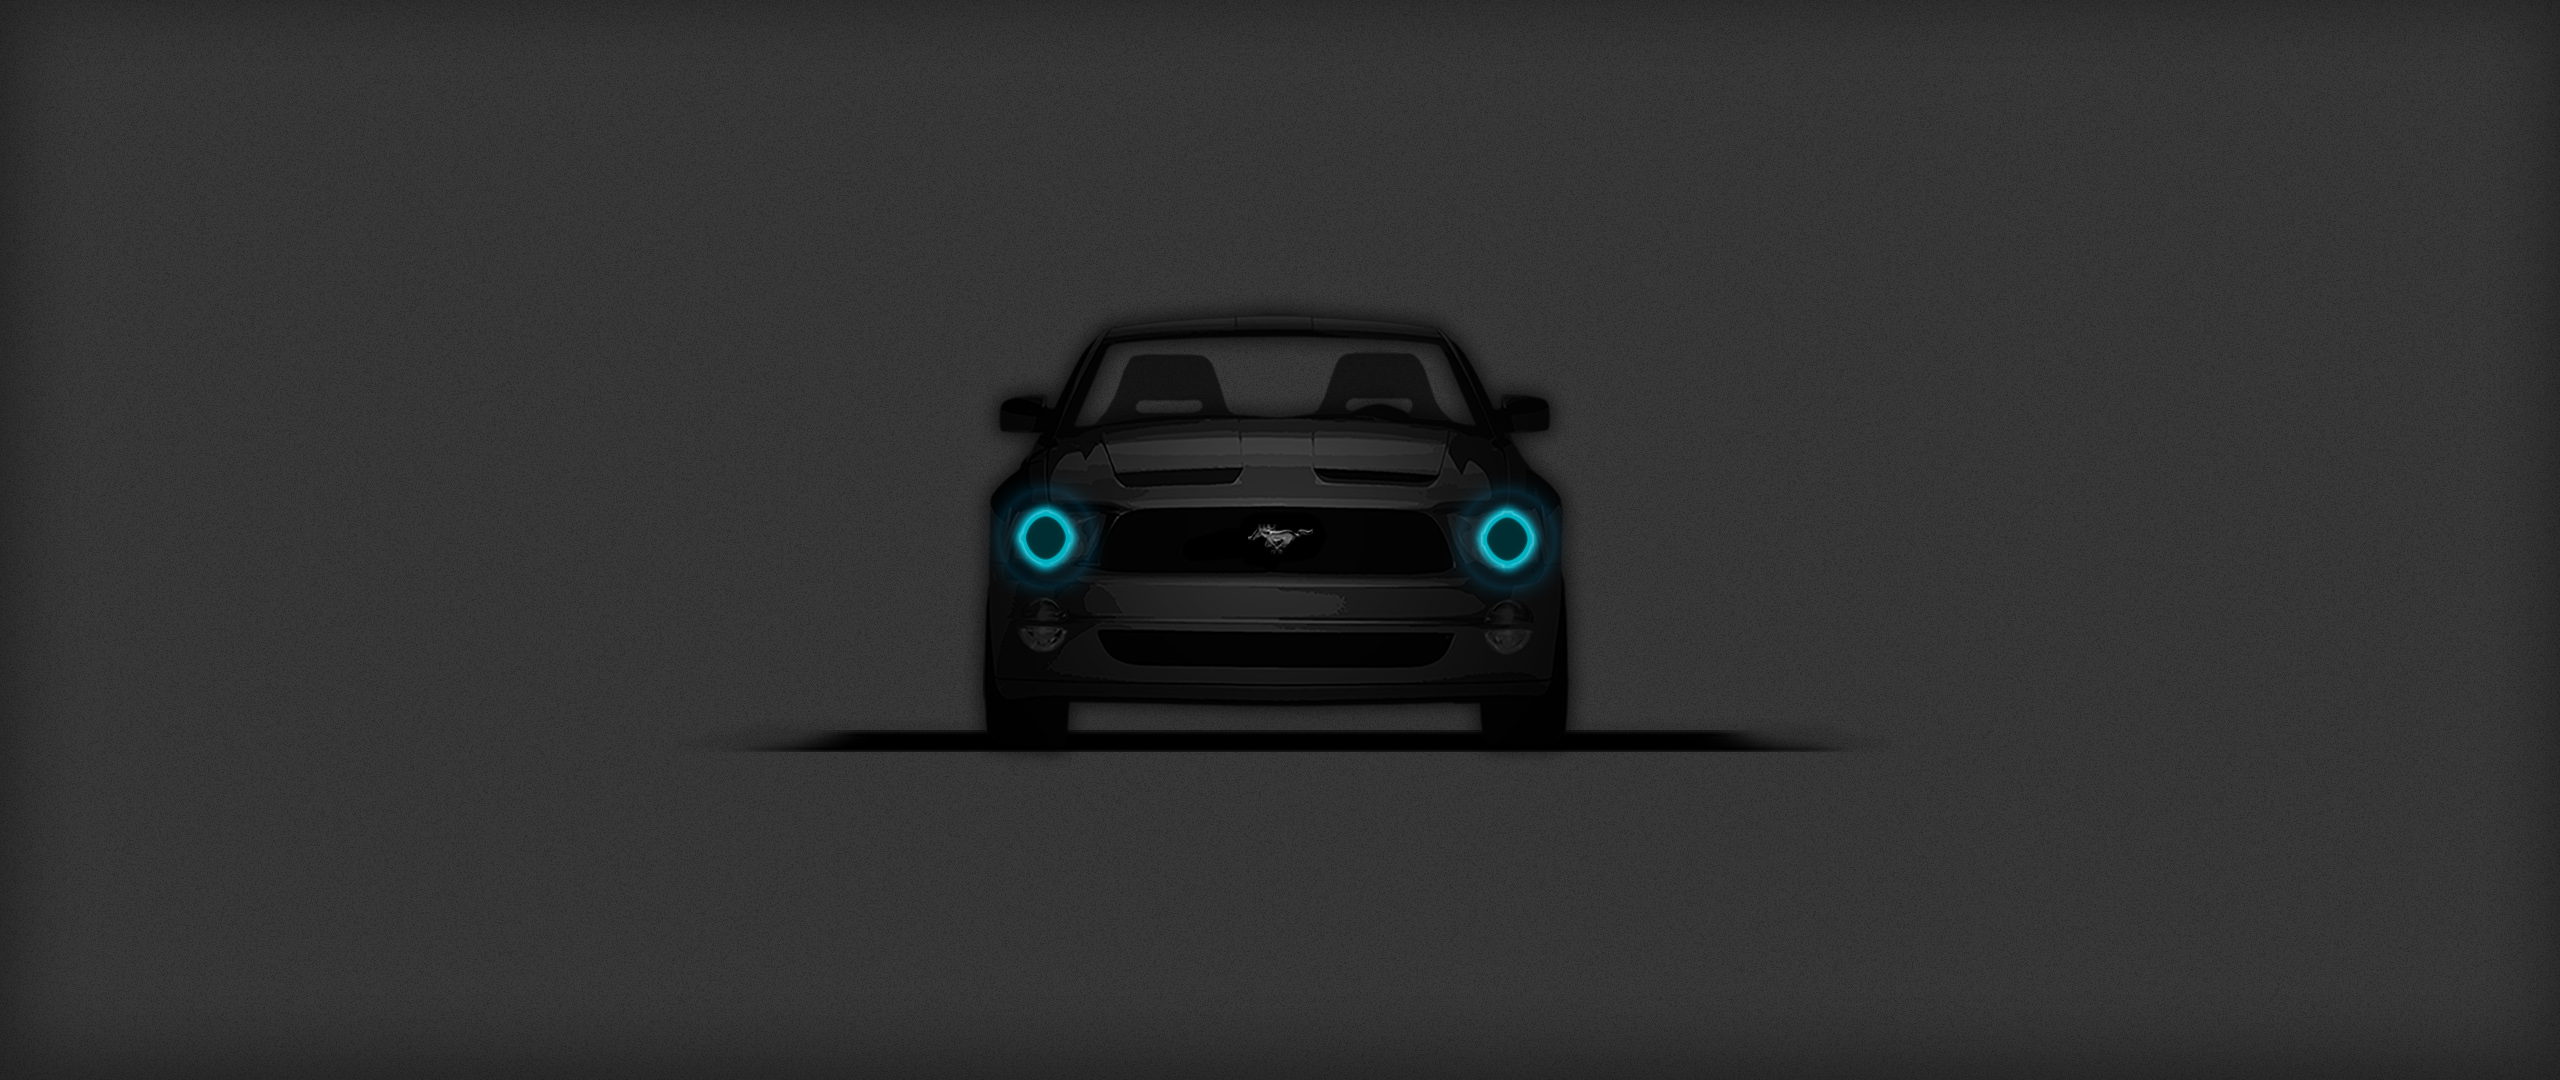 Ford Mustang silhouette with headlights on fire.